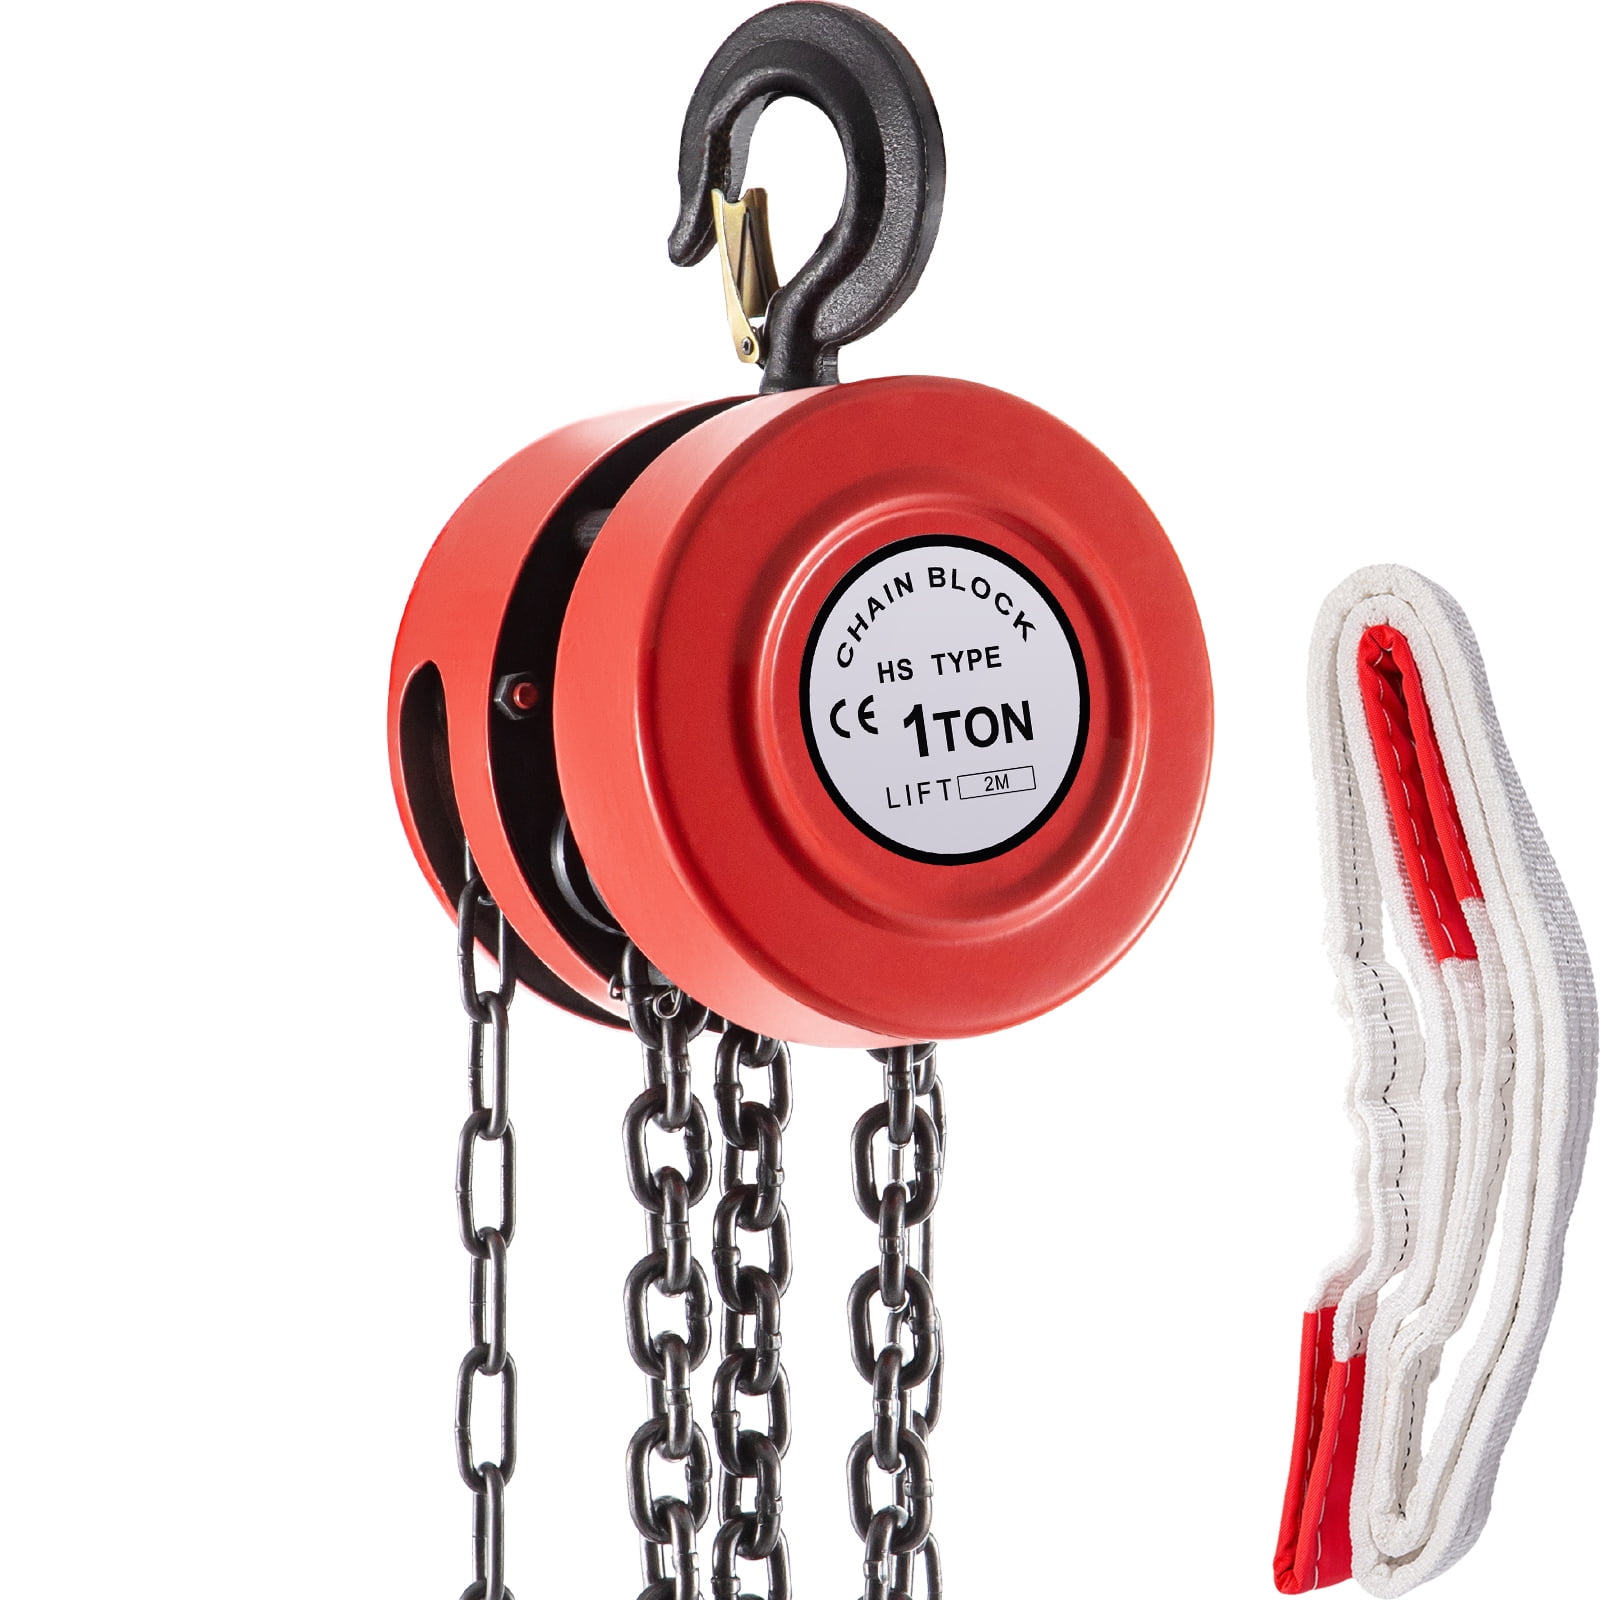 Red 7ft/2m Lift Manual Hand Chain Block VEVOR Hand Chain Hoist Manual Hoist w/Industrial-Grade Steel Construction for Lifting Good in Transport & Workshop 2200 lbs /1 Ton Capacity Chain Block